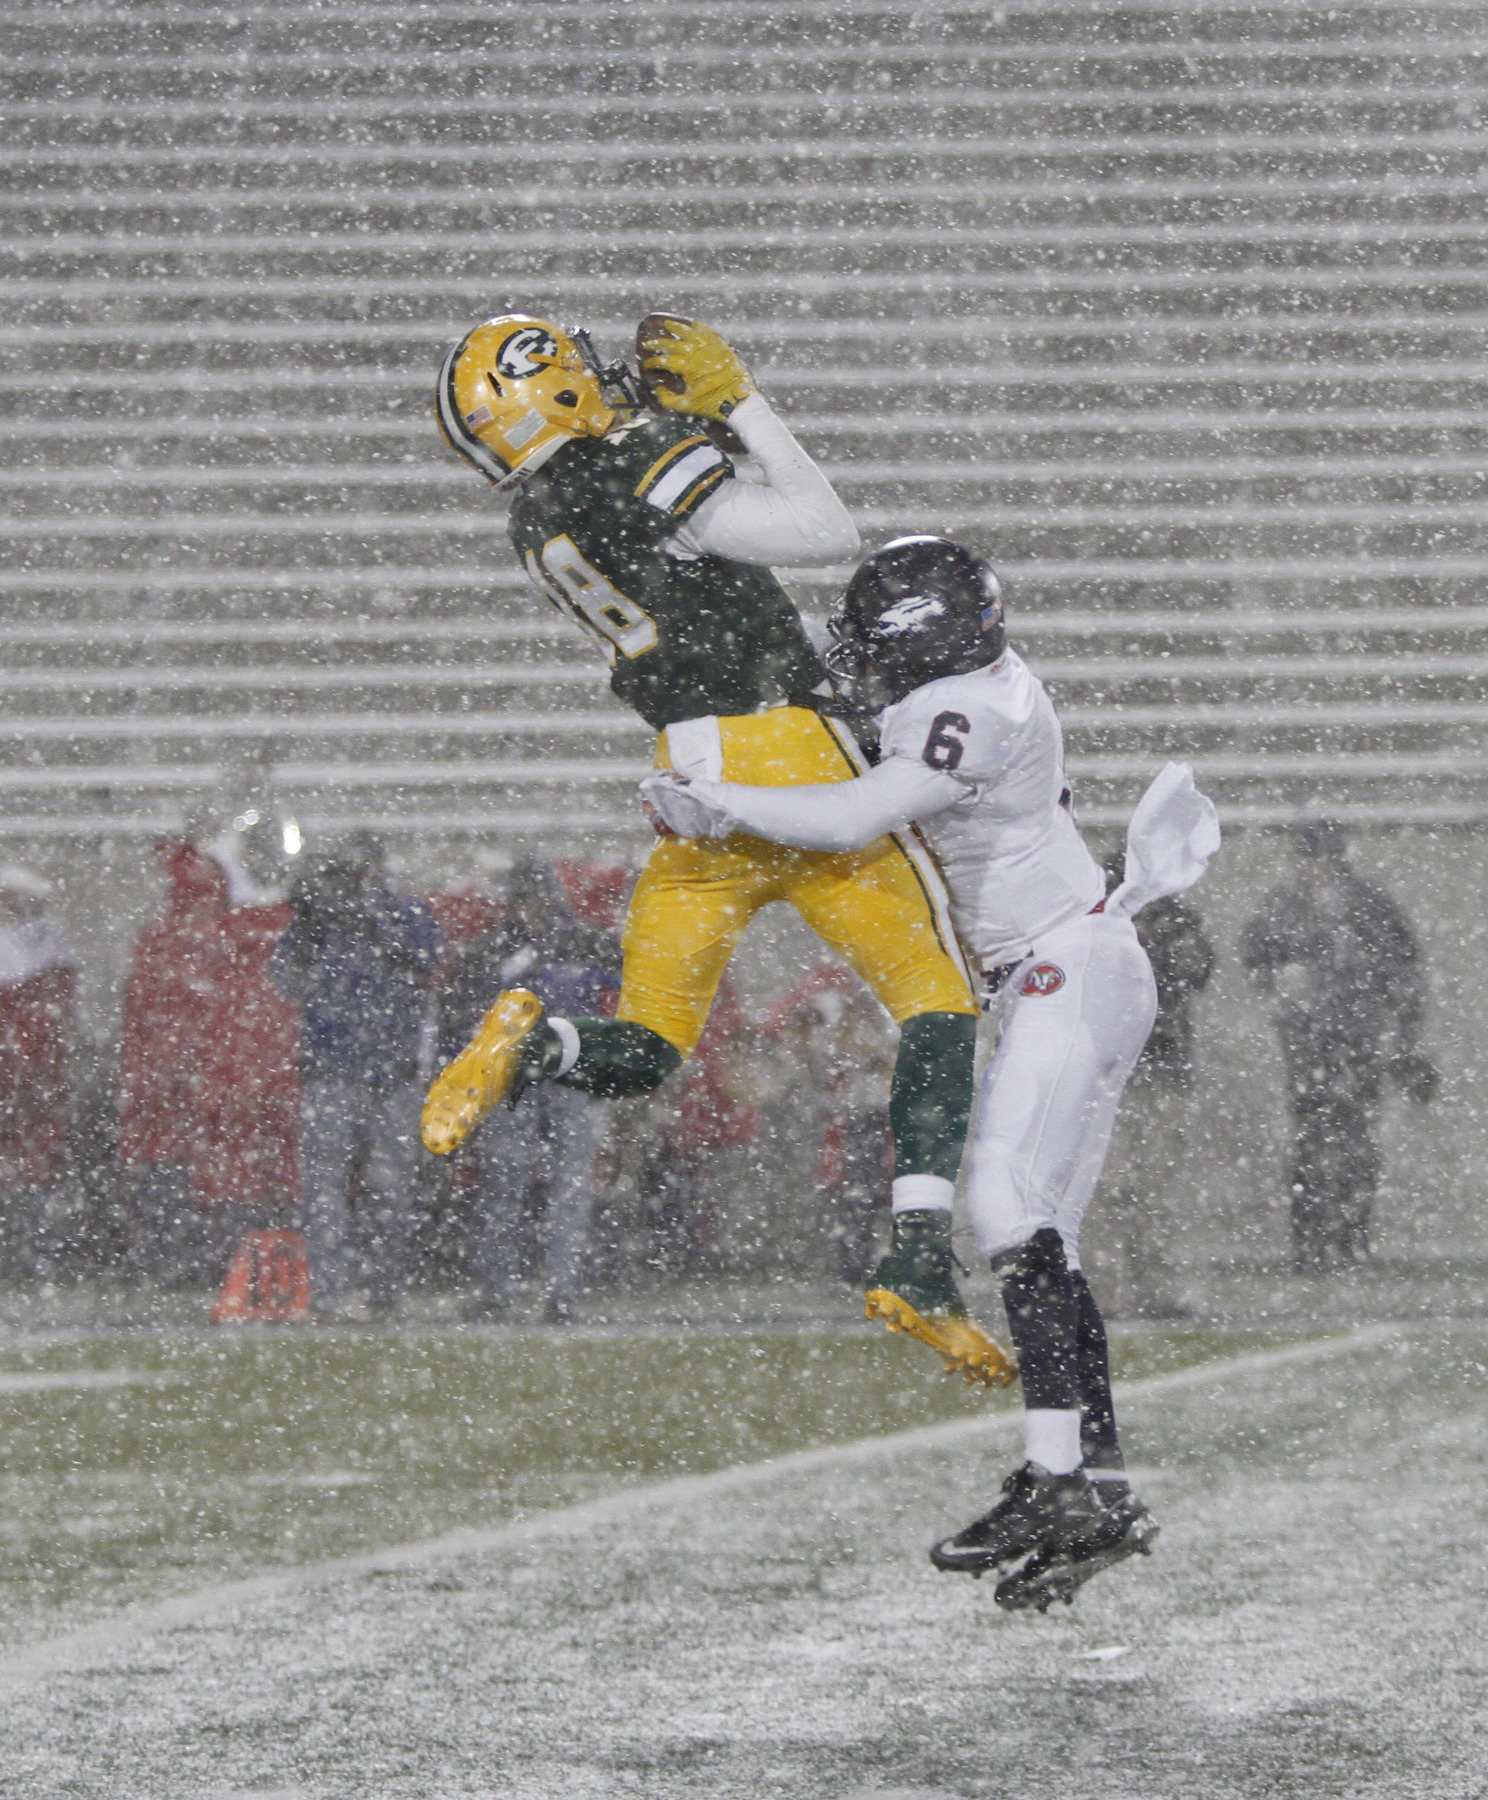  .          ROBERT  K. YOSAY | THE VINDICATOR..In blinding Snow   Fitchs #6 Rodney Smith brings down #18  St Eds David Dowell after receiving  a first down pass during second quarter action ..Austintown Fitch and St Edwards at Infocision in Akron.....-30-